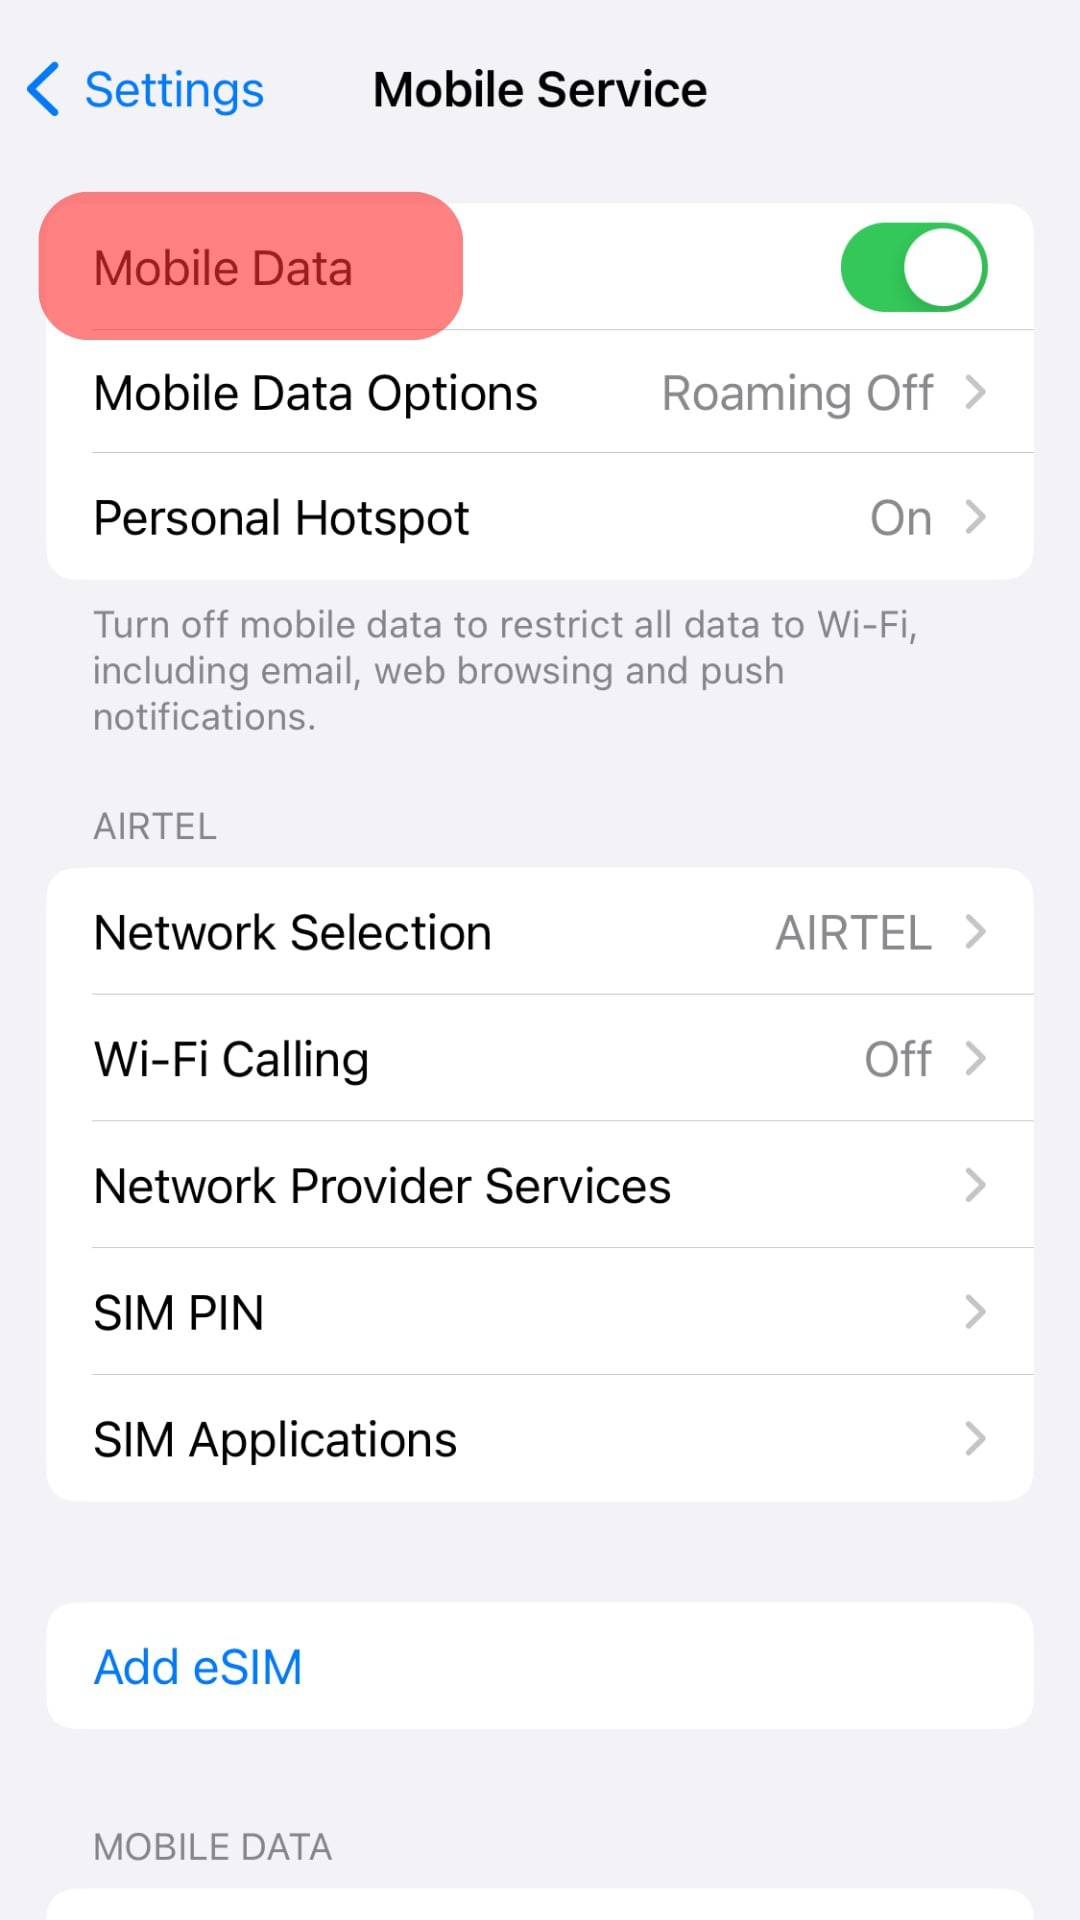 Enable The Mobile Data Option.